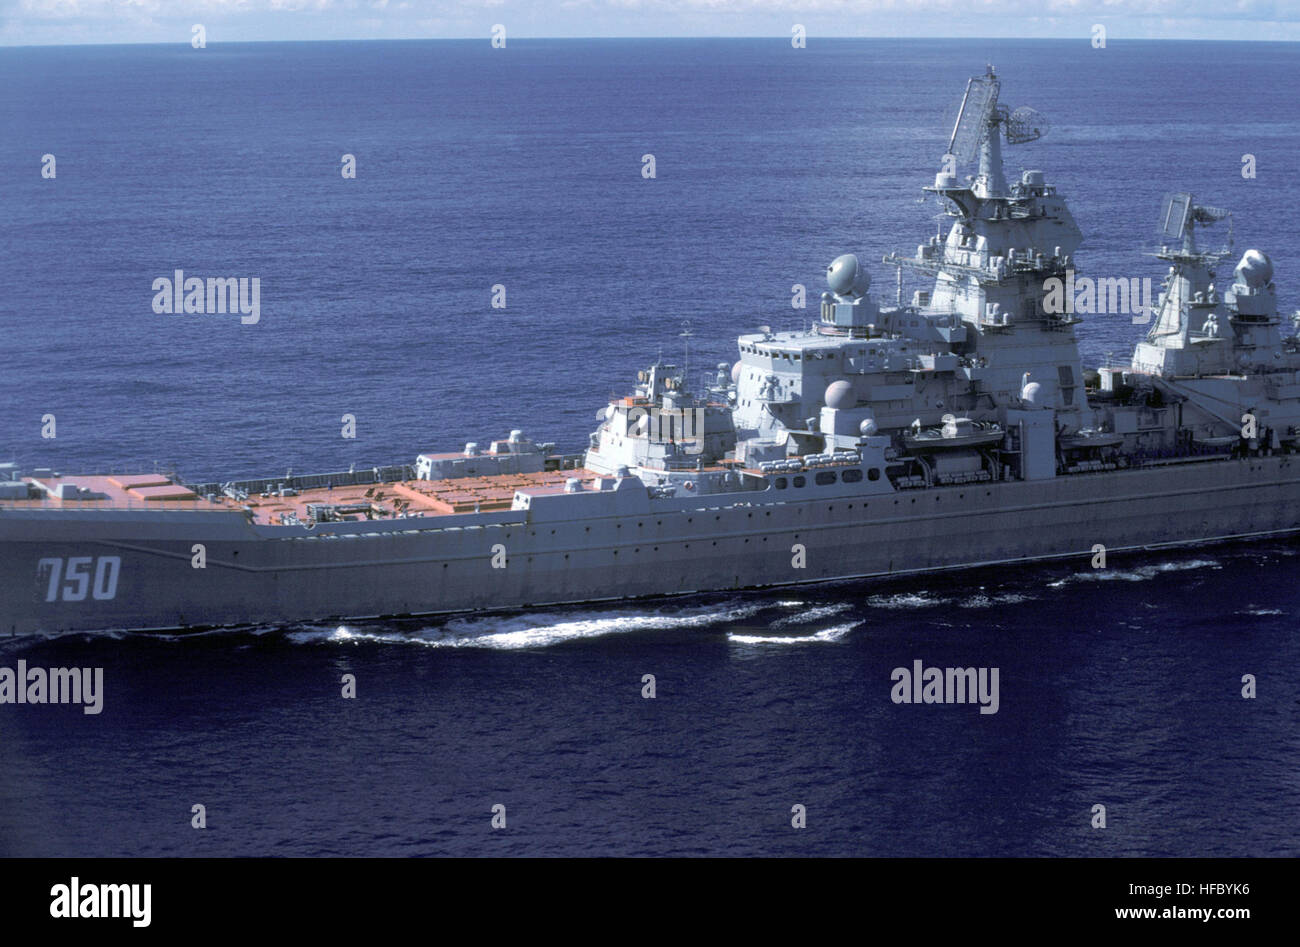 Aerial port view (amidships) of the Soviet Kirov class nuclear-powered guided missile cruiser FRUNZE underway